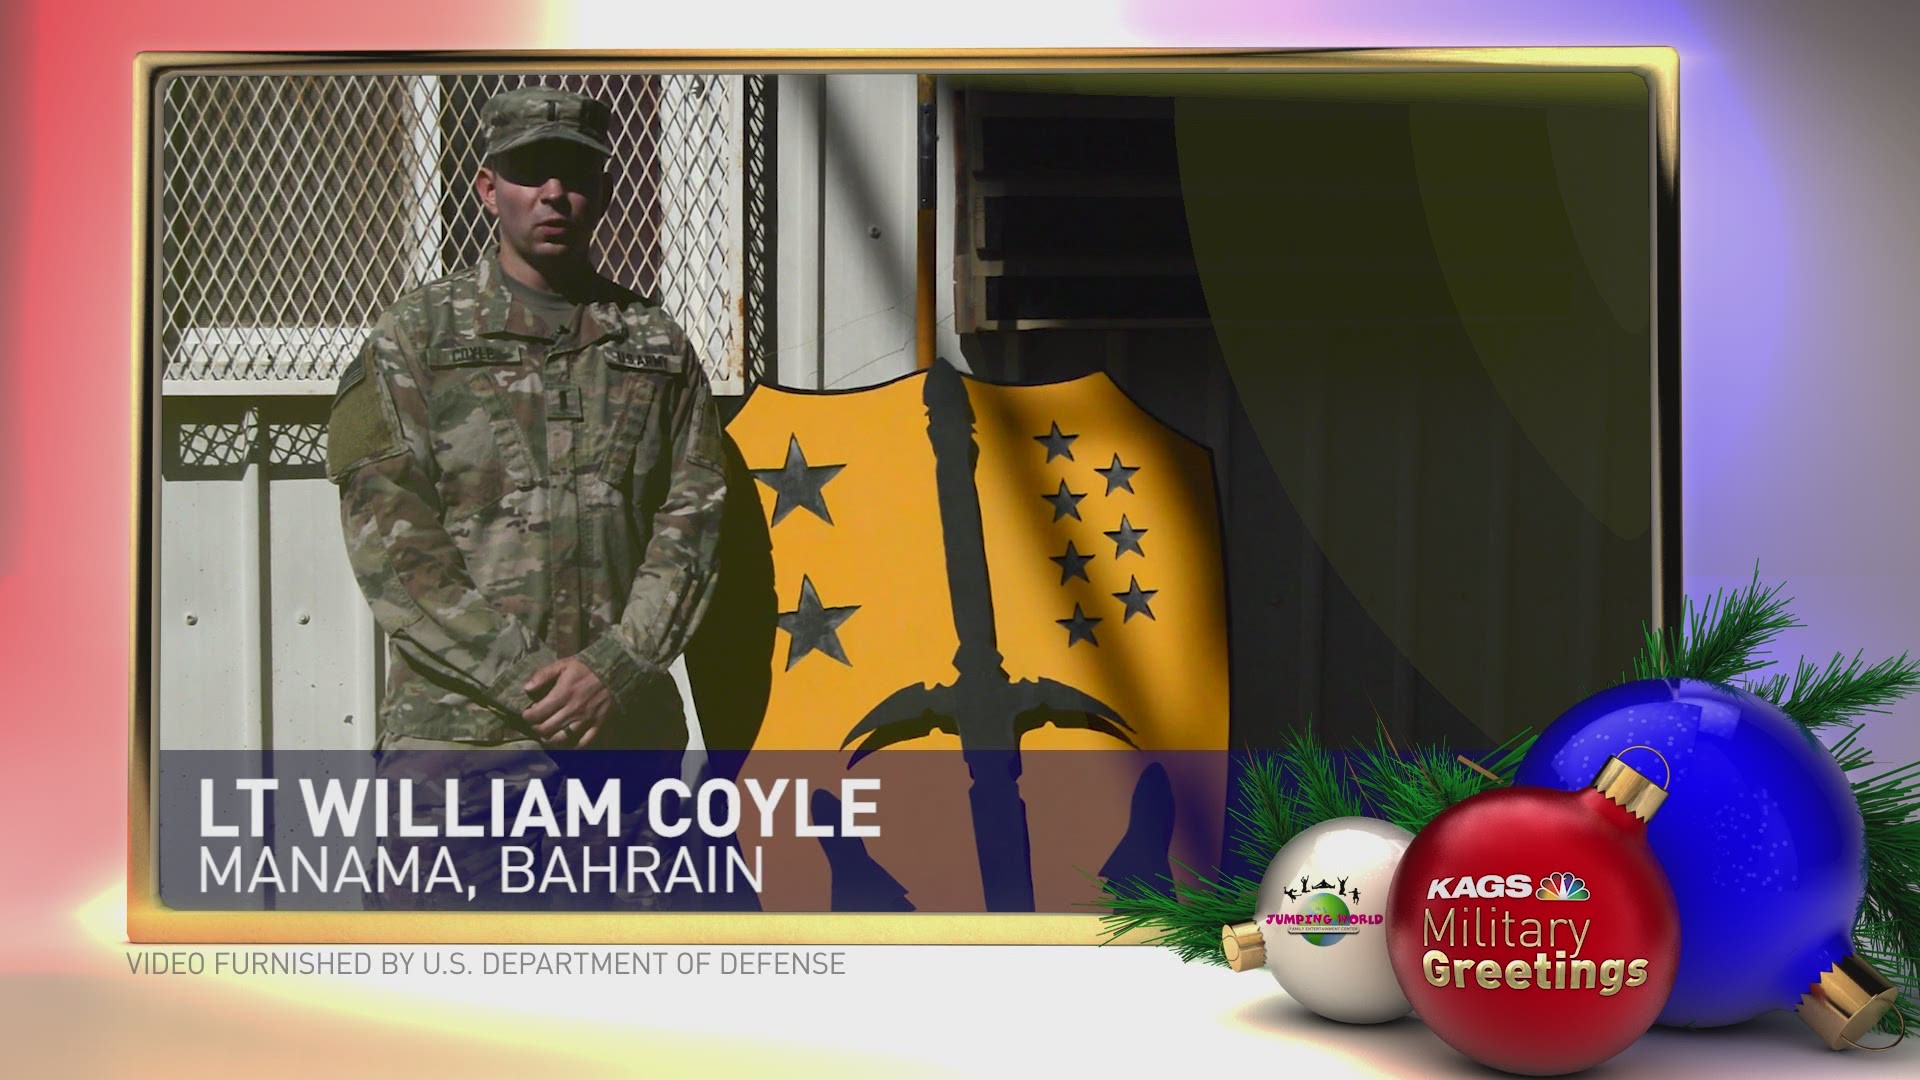 Jumping World presents Military greetings from MAJ Nathan Perry and LT William Coyle